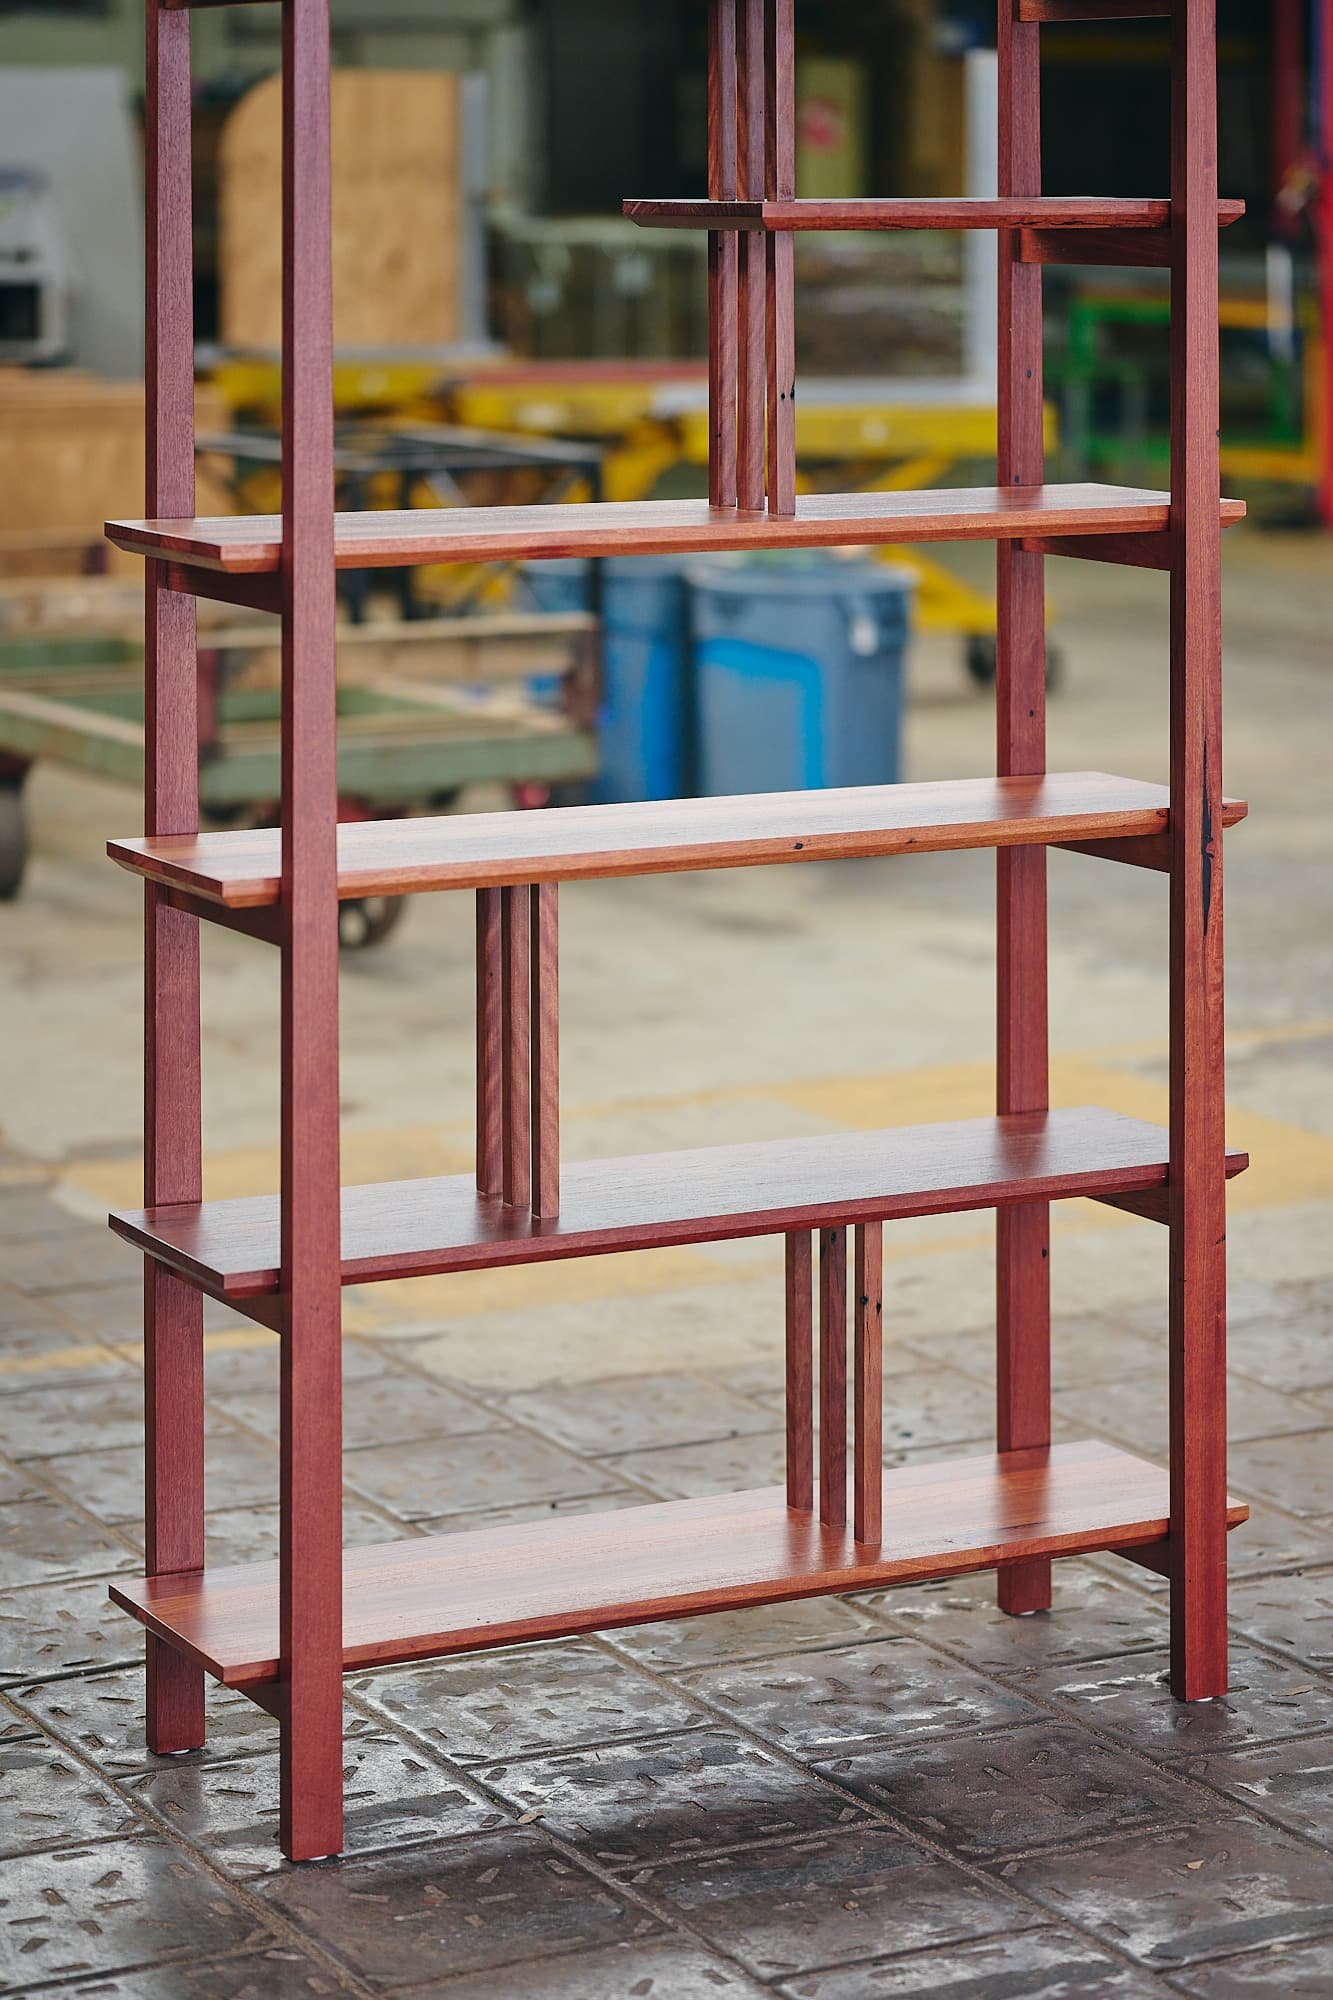 Japanese-style ornamental shelving unit in mixed reds